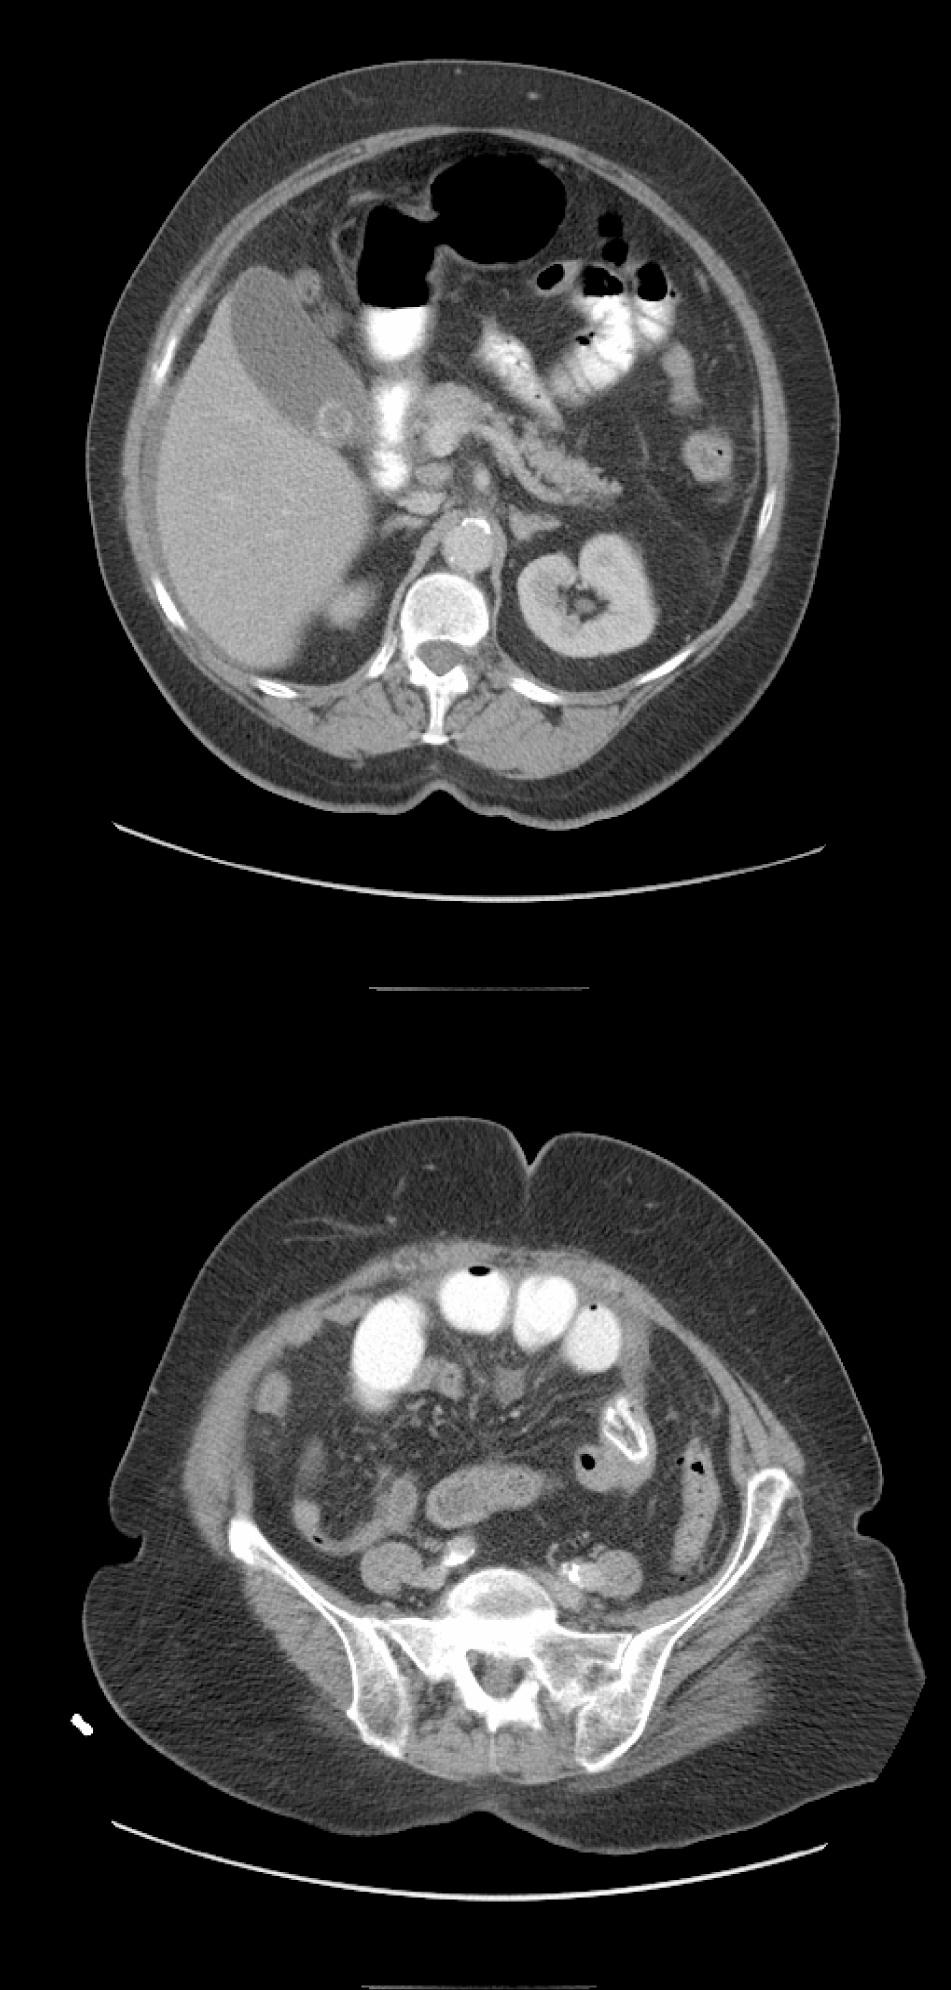 Saurabh et al. 2 CASE REPORT Patient 1: A 75 year old female presented with a three day history of diffuse abdominal pain, distension, nausea and vomiting.